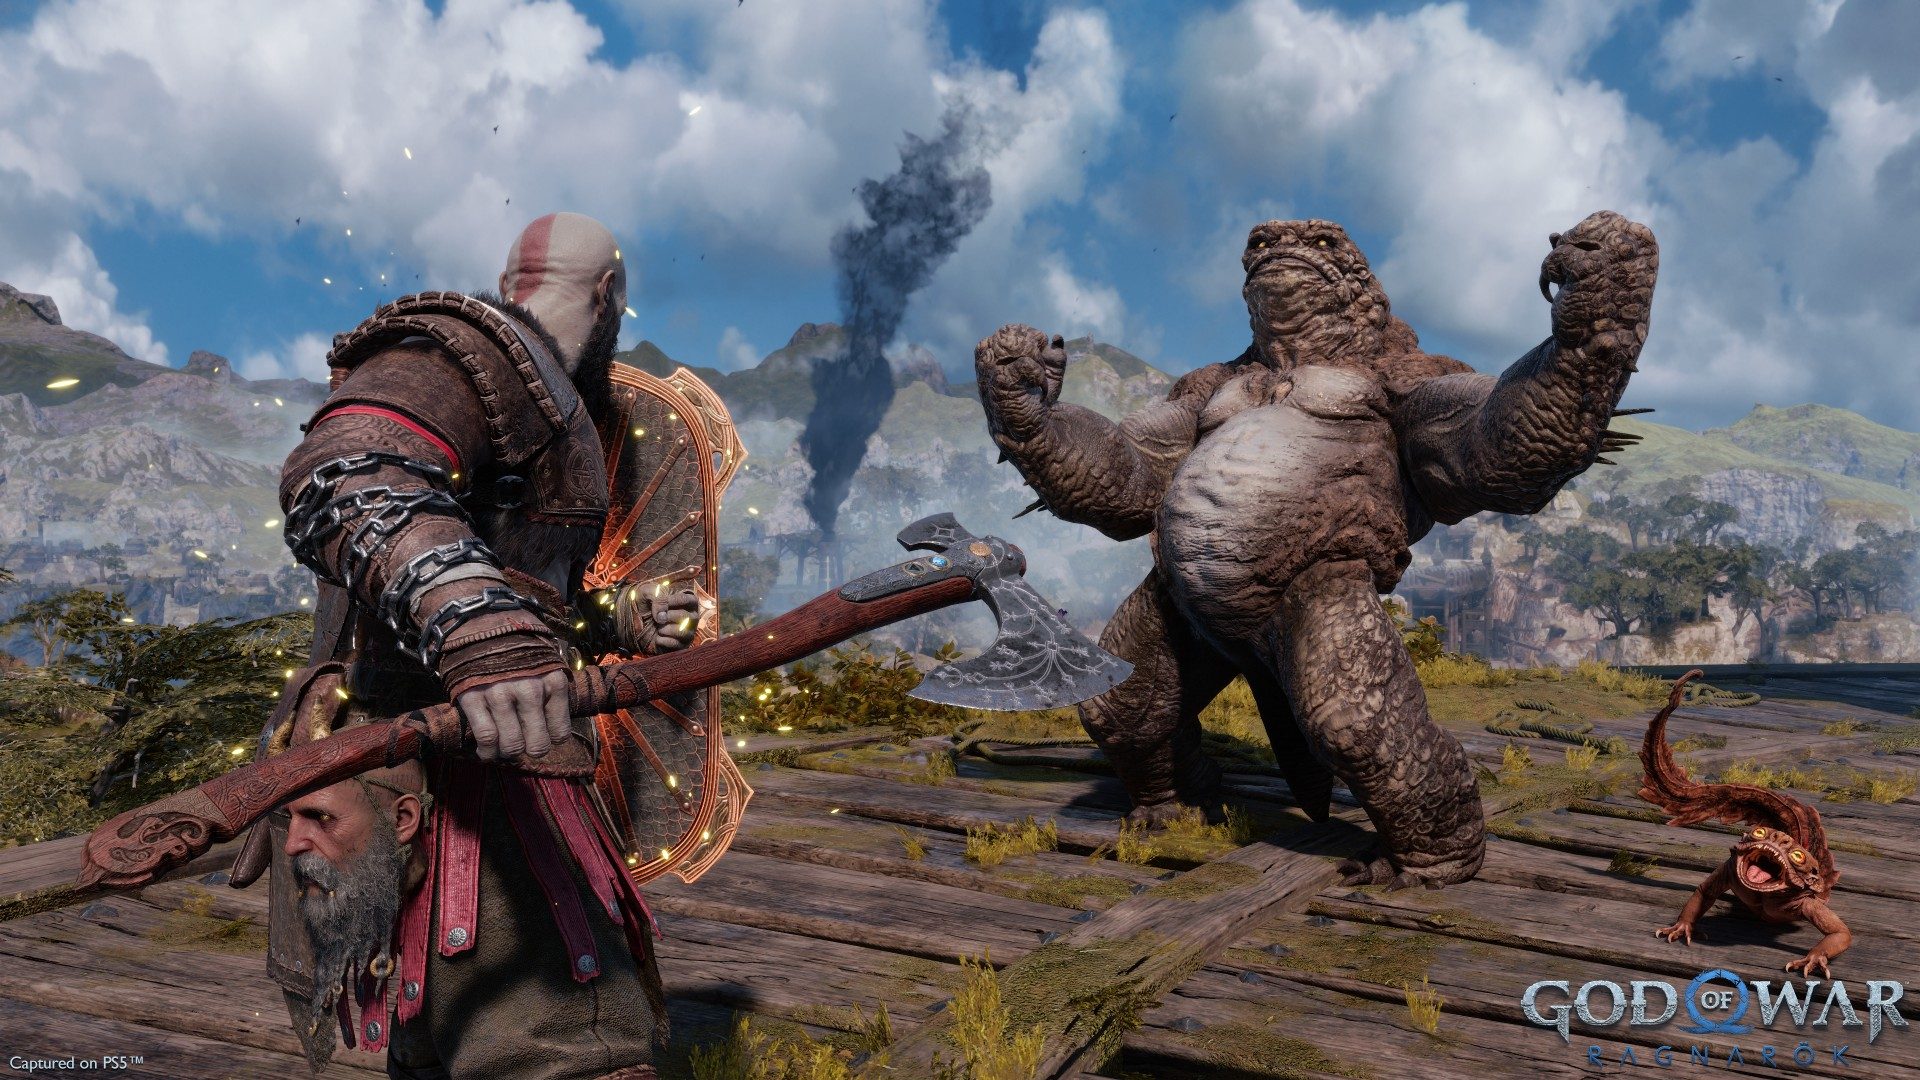 God of War Ragnarok Needs to Improve on the First's Repetitive